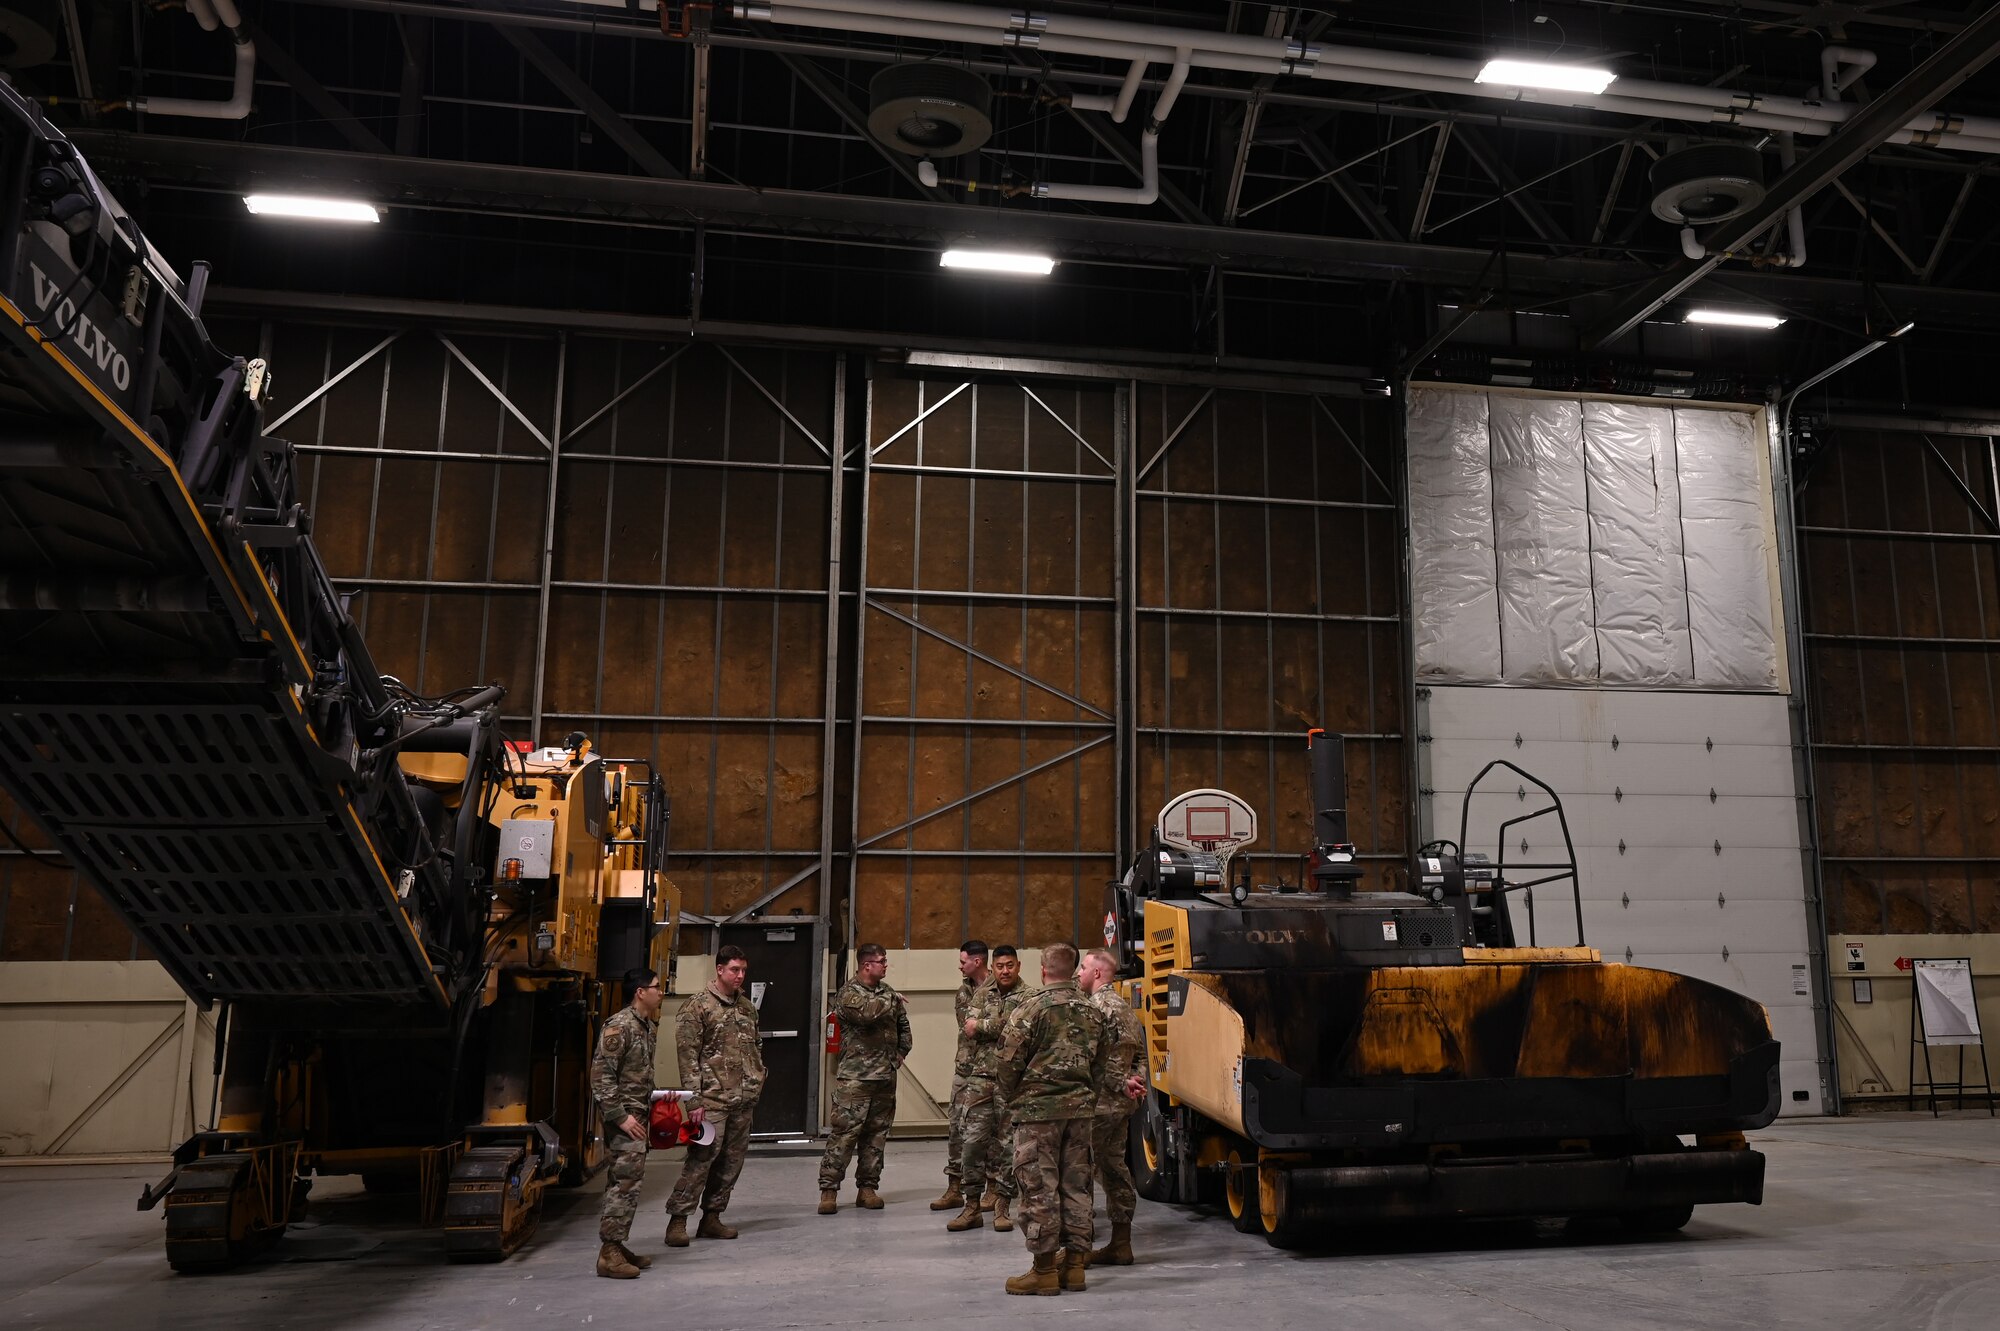 A group of military men stand inside an airfield hangar between two pieces of heavy equipment.